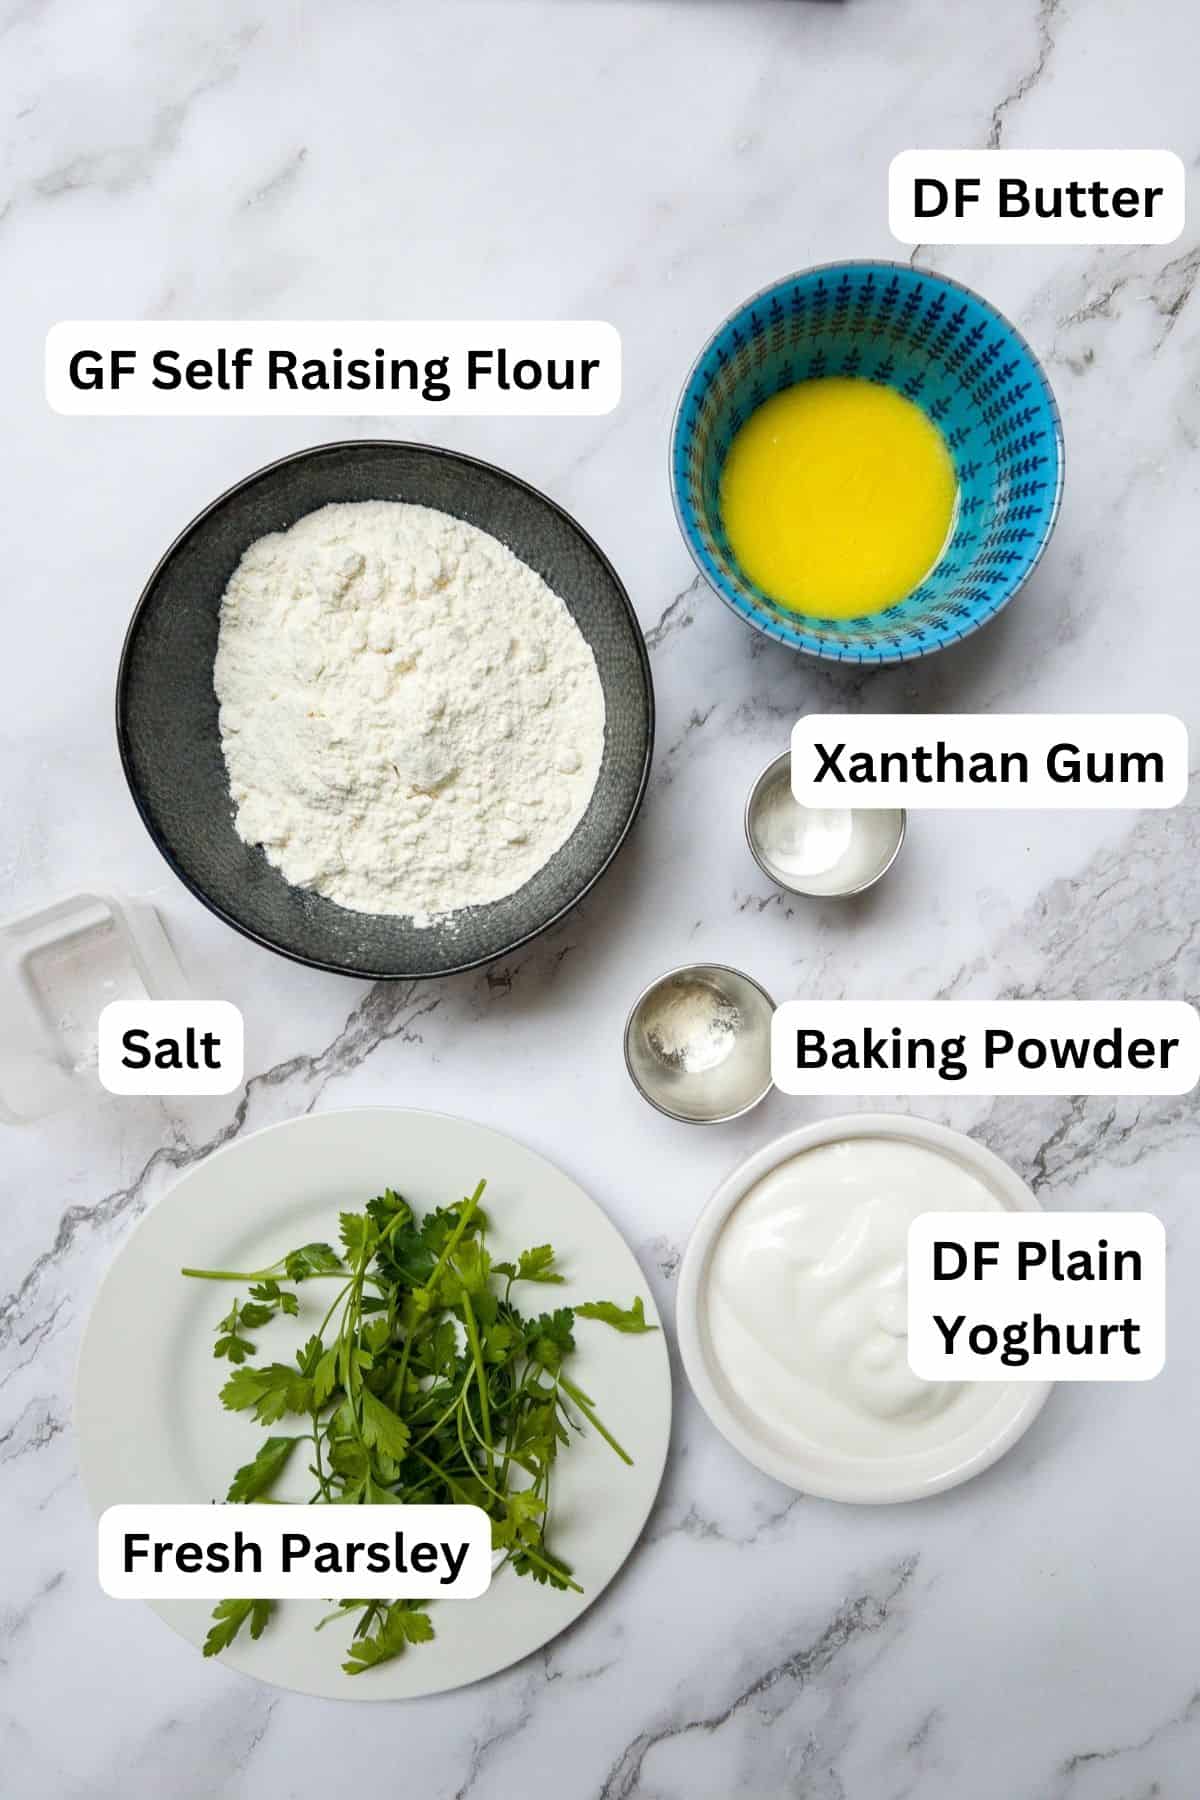 Ingredients laid out for gluten free naan bread.